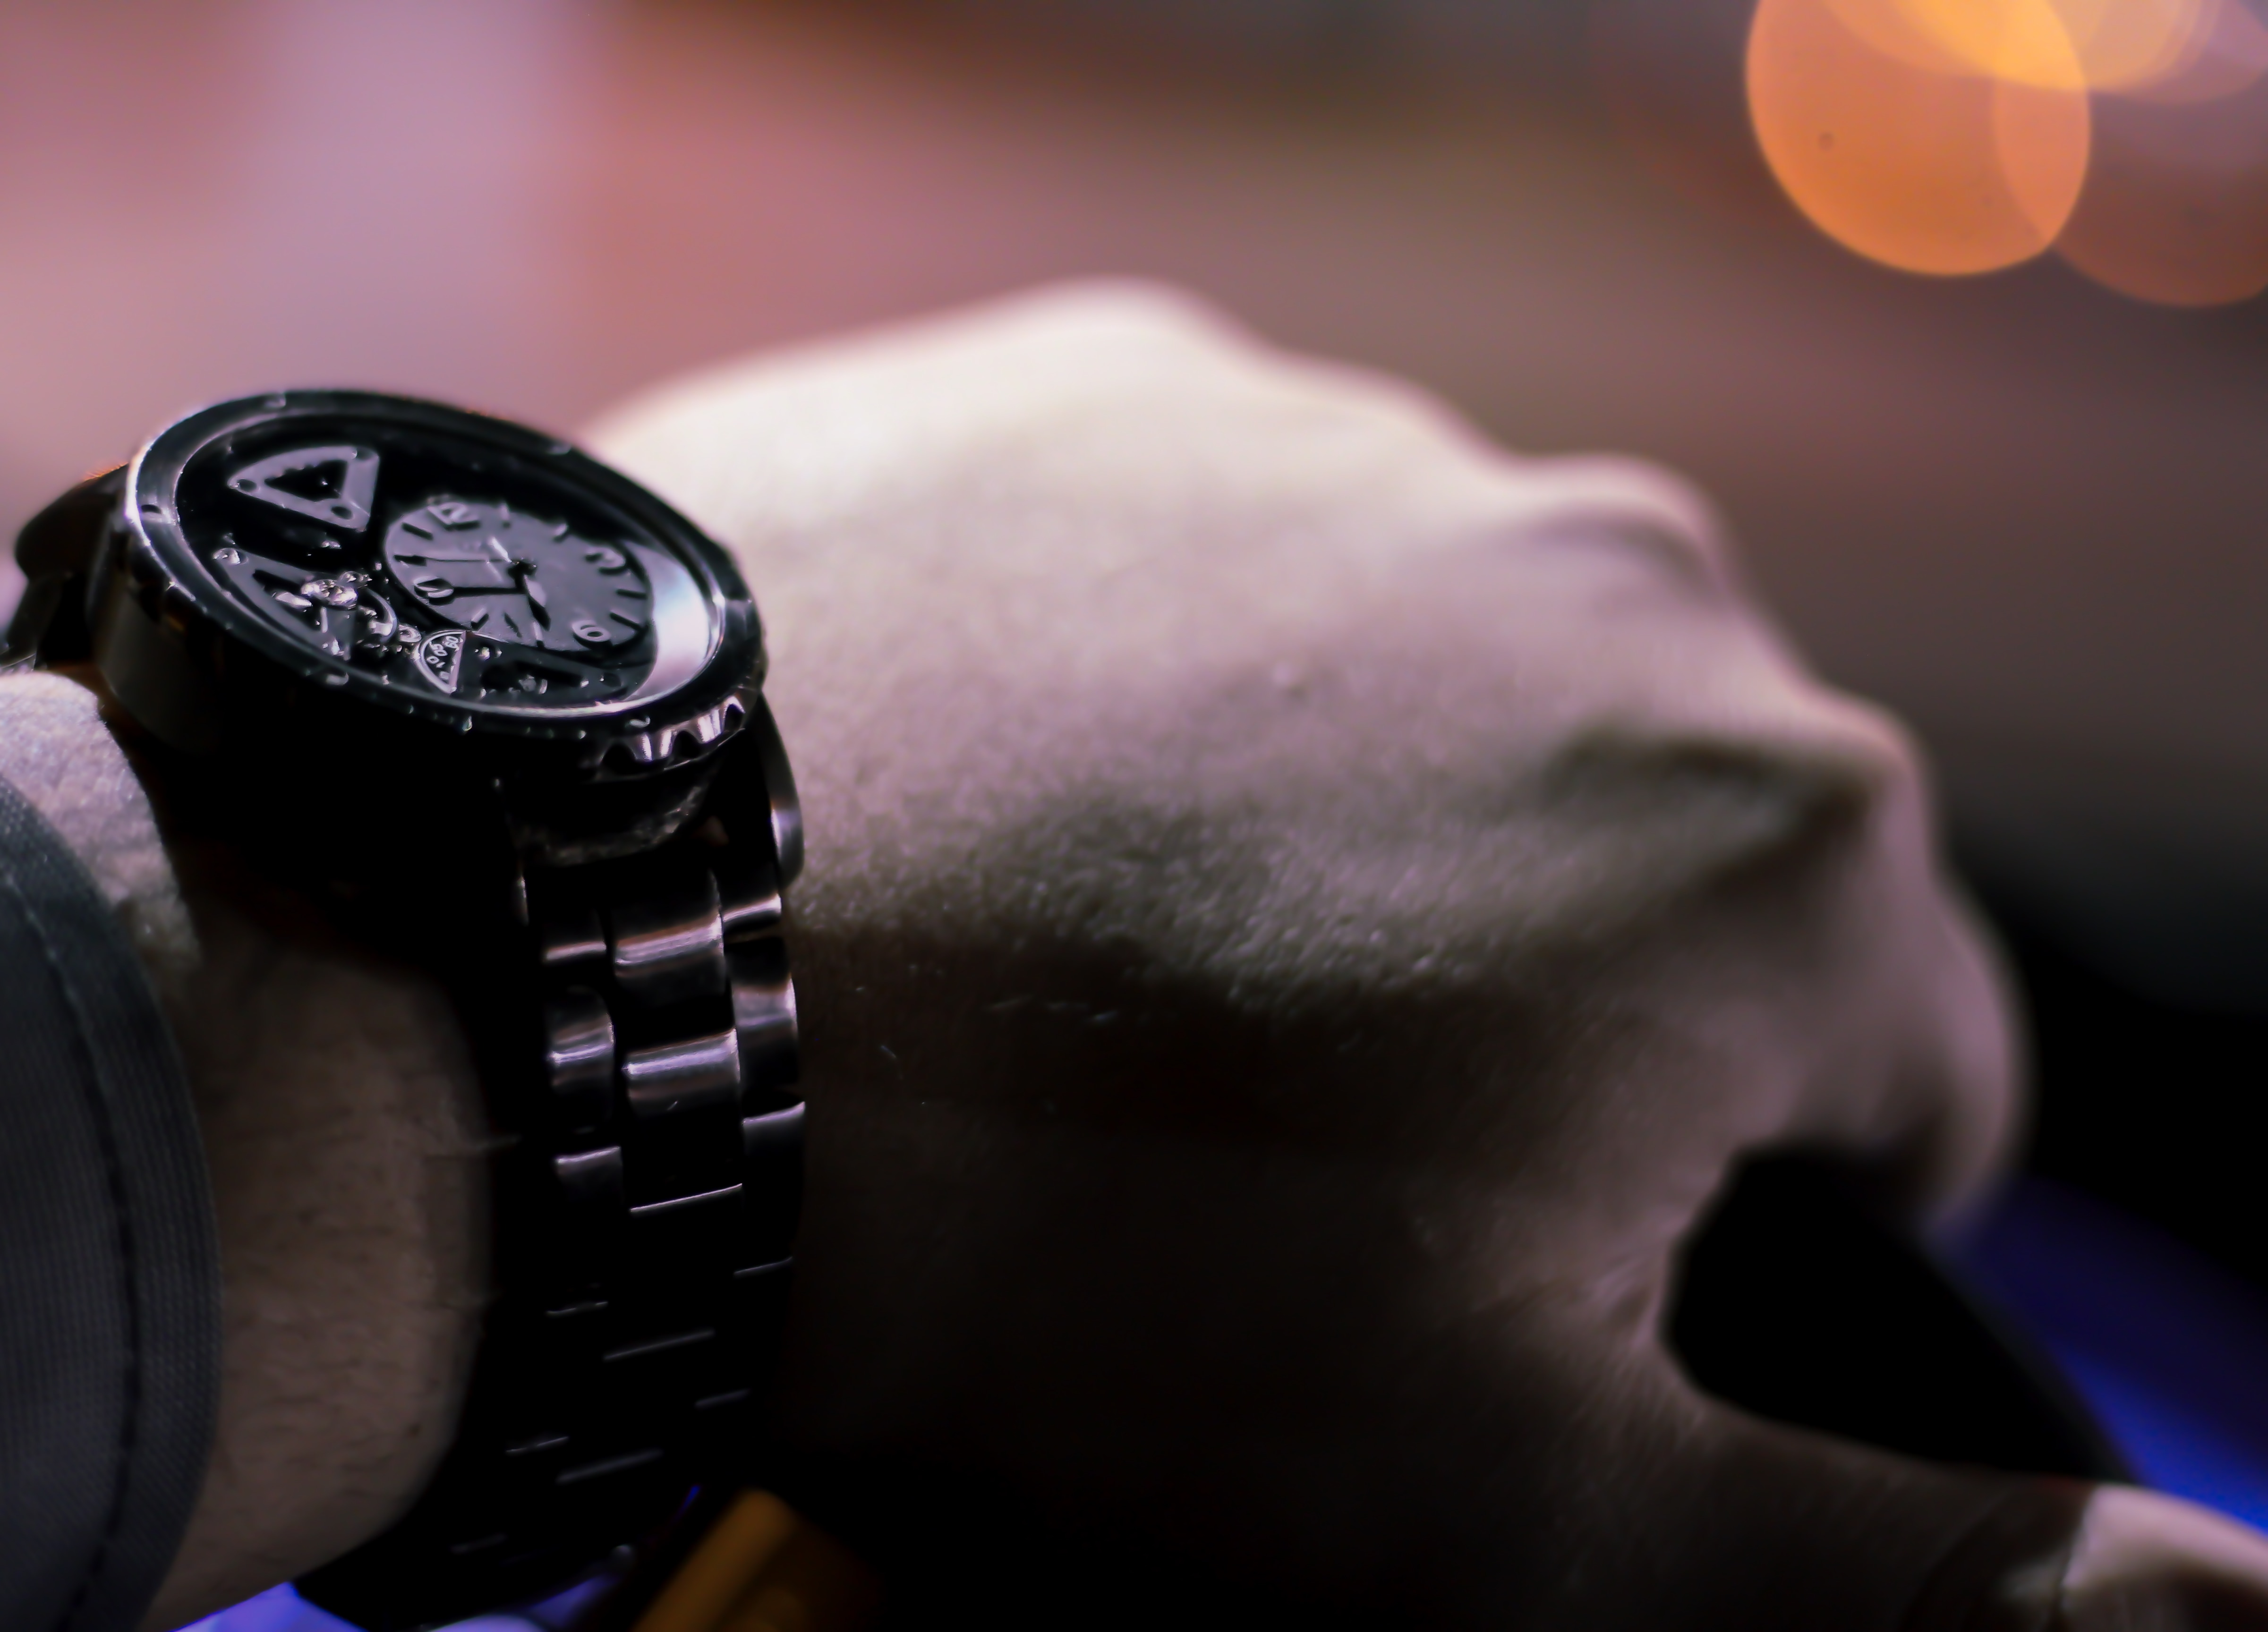 human hand wearing black chronograph watch with link bracelet